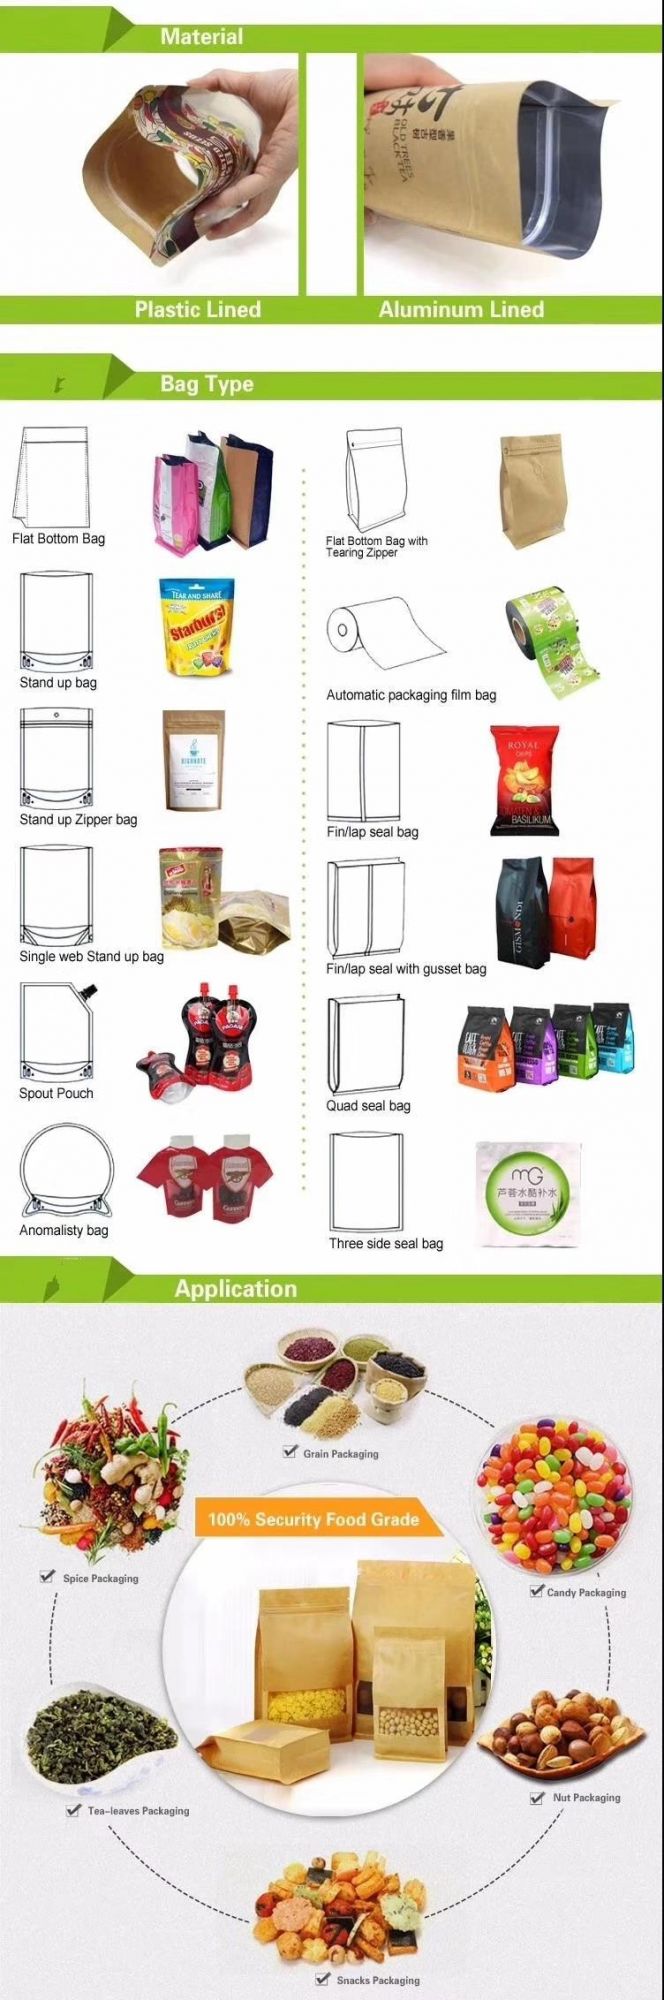 Excellent Printing Plastic Food Bag for Packing Dry Roasted Soy Nuts